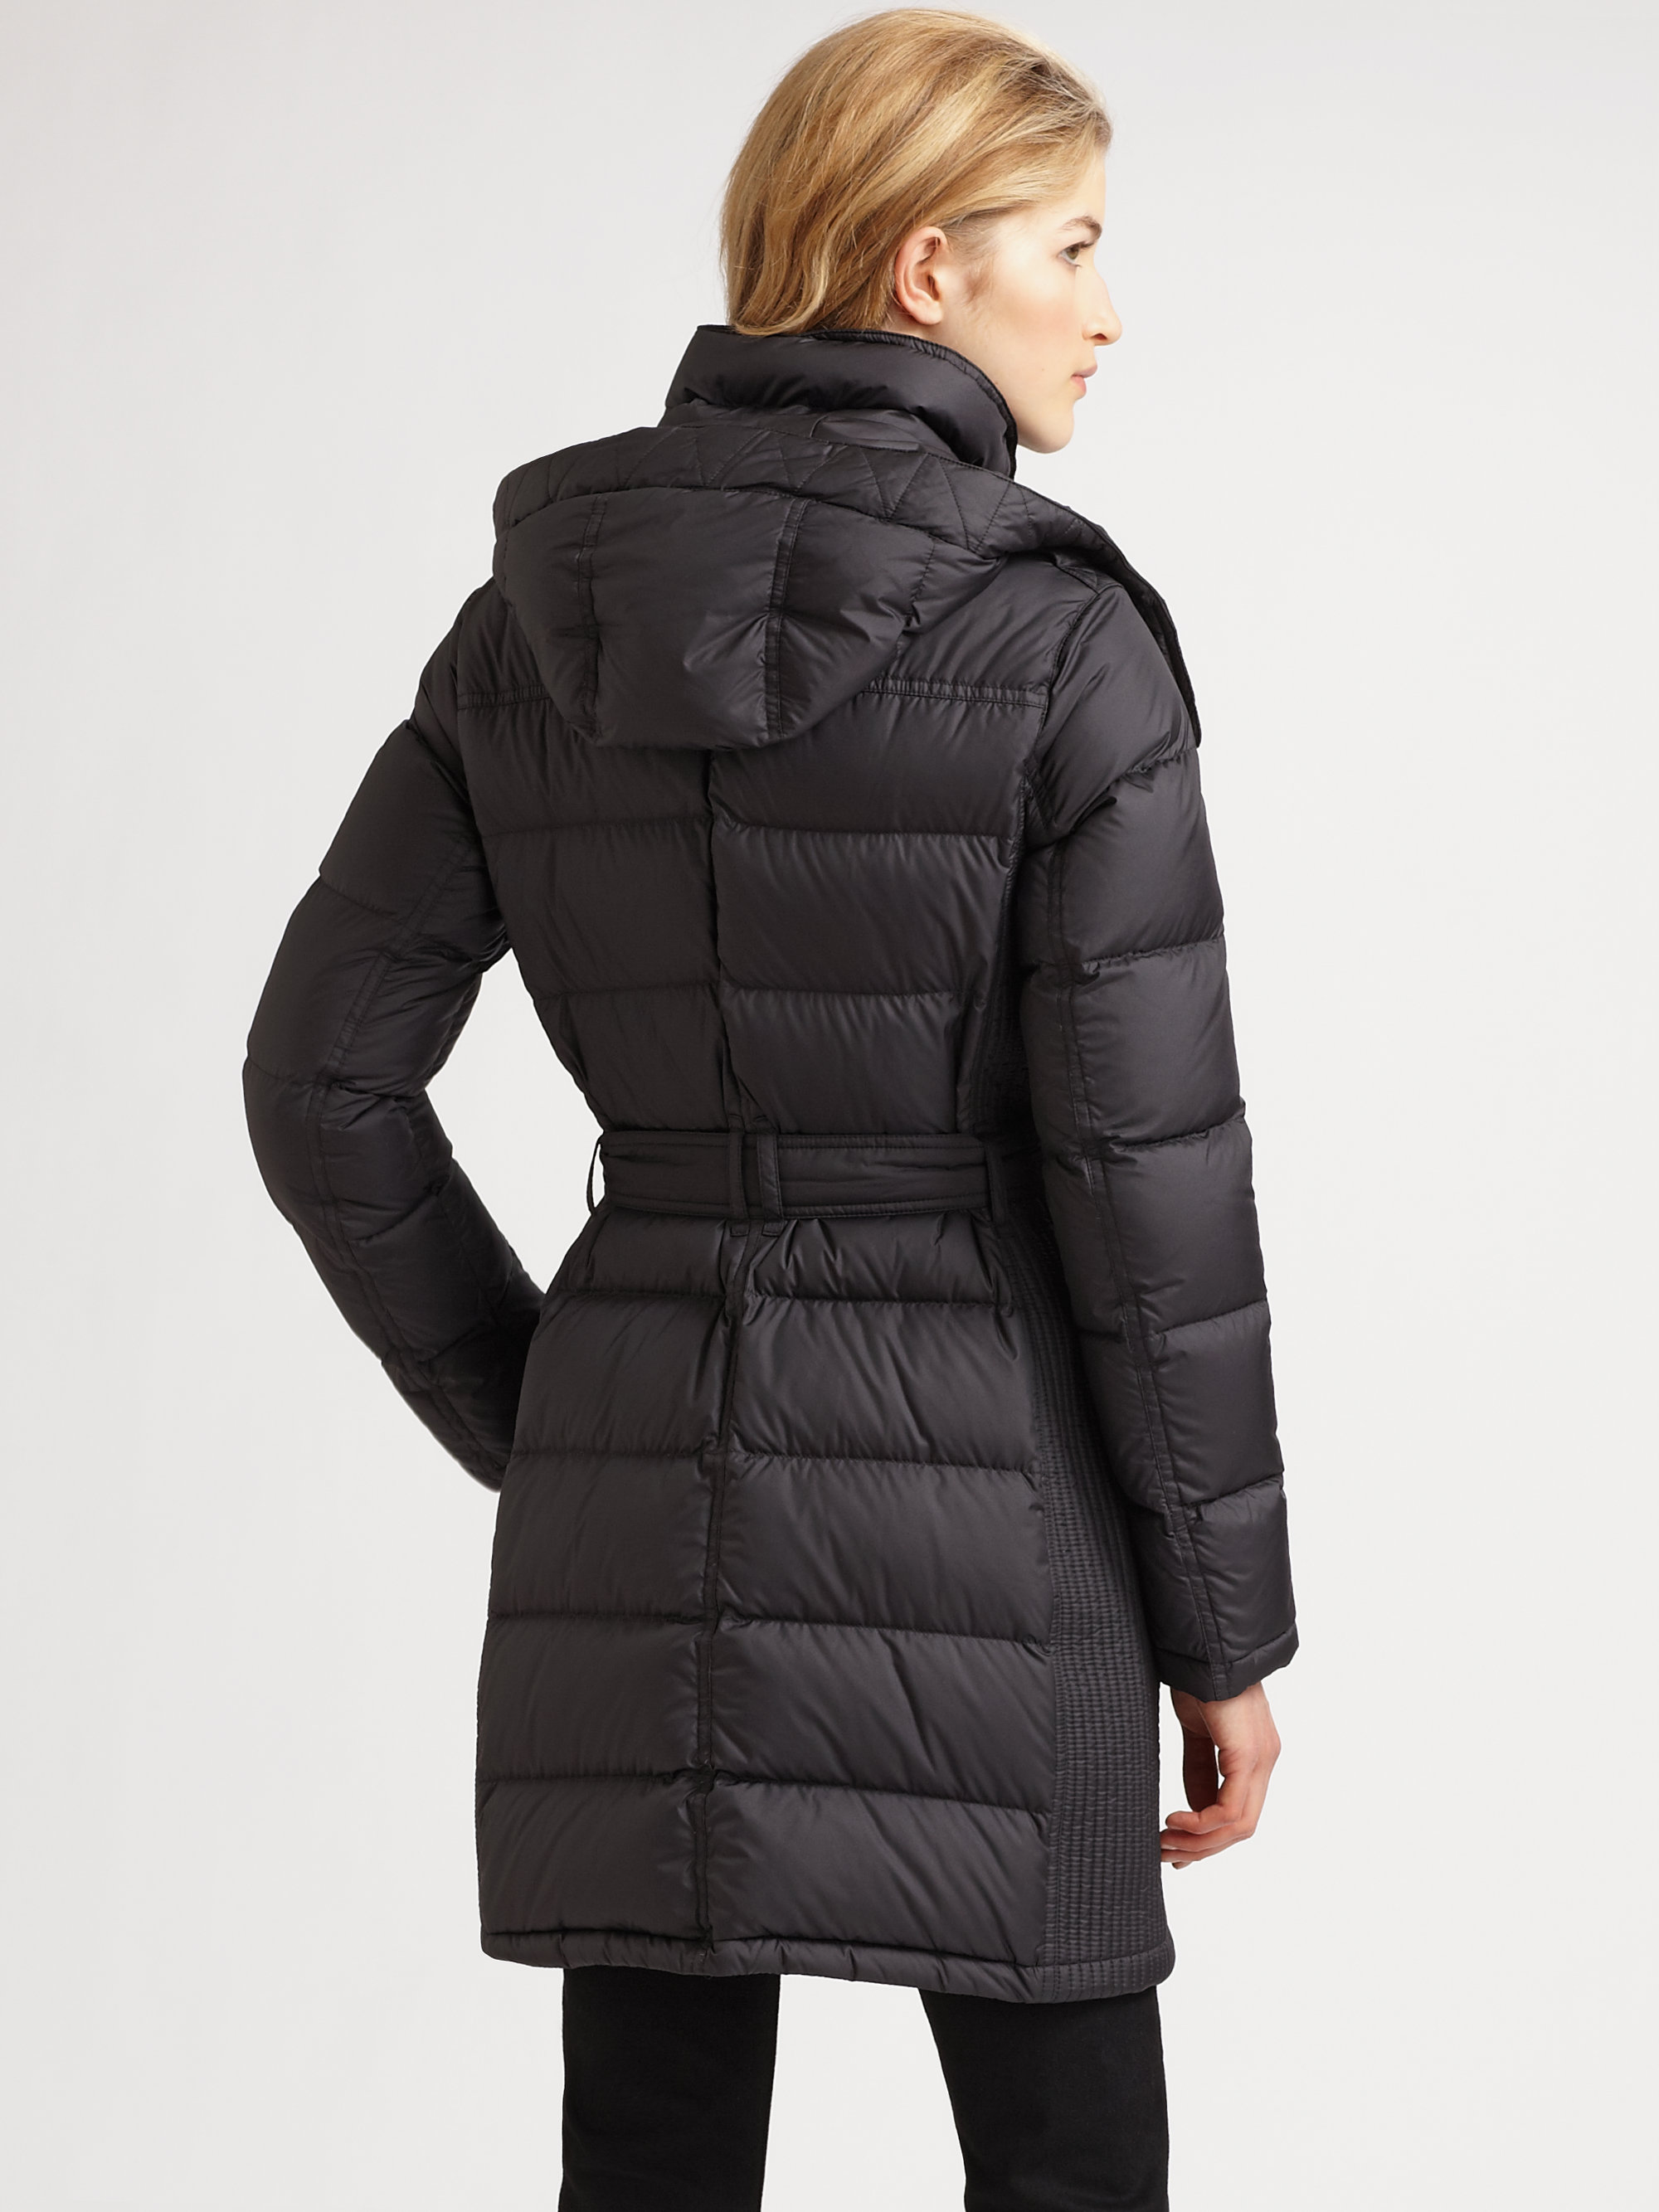 Burberry Brit Quilted Buckle Belt Puffer Coat in Black (Gray) - Lyst